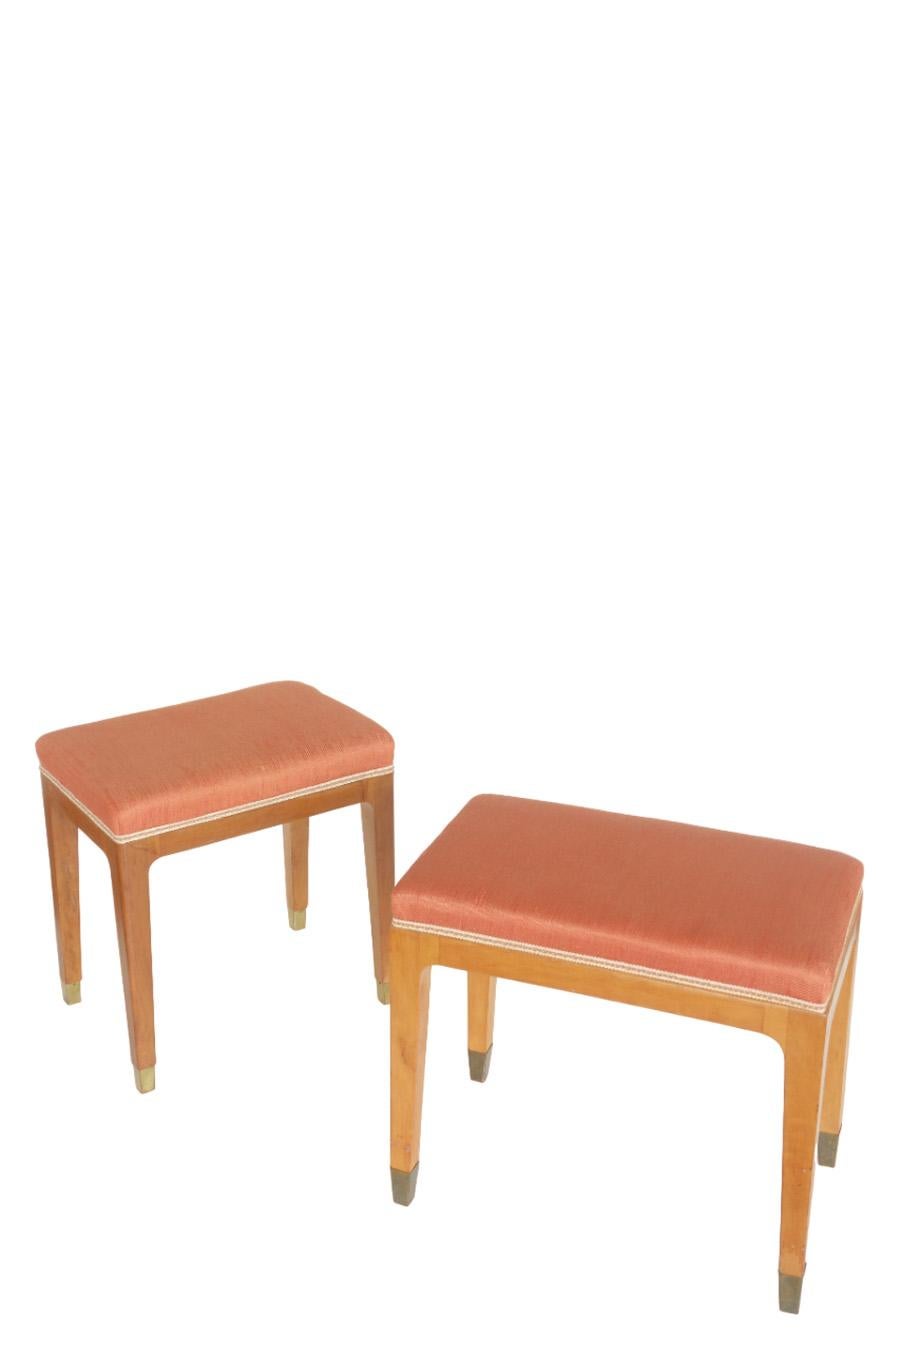 2 Stools
Paolo Buffa
Italy, 1950

Pear wood and upholstered seat with upholstery in tesuto
brass tips
Excellent condition
The stools are two different sizes with slightly different brass tips

stool 1: h45  / w 50 / d 30 cm
stool 2: h 45 / w 43 / d